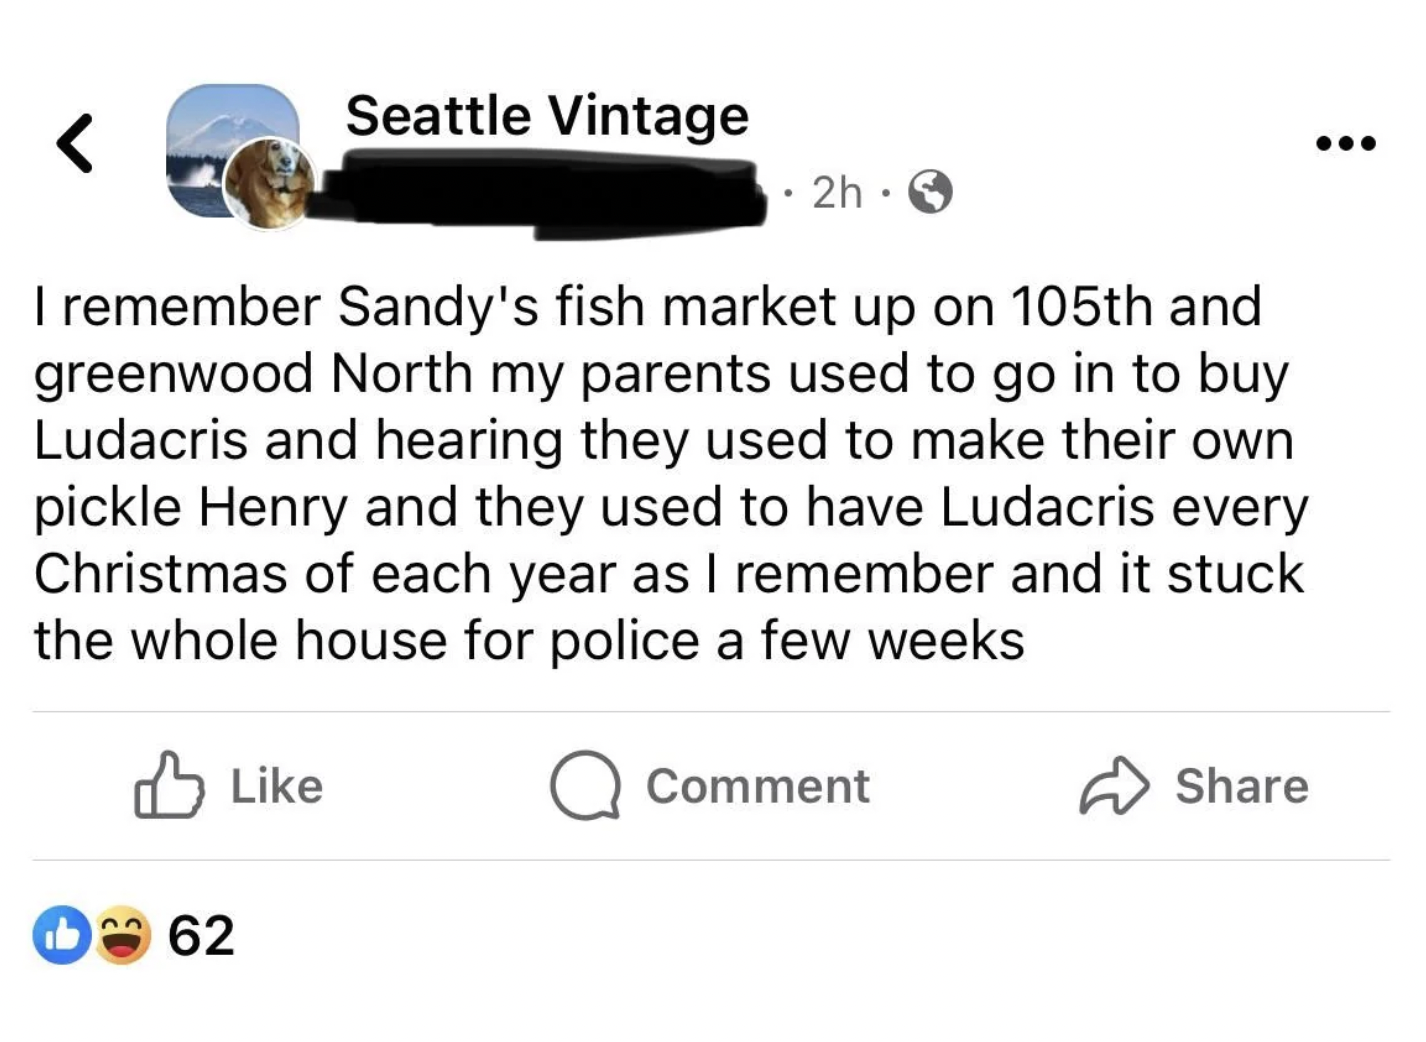 screenshot - Seattle Vintage 2h I remember Sandy's fish market up on 105th and greenwood North my parents used to go in to buy Ludacris and hearing they used to make their own pickle Henry and they used to have Ludacris every Christmas of each year as I r